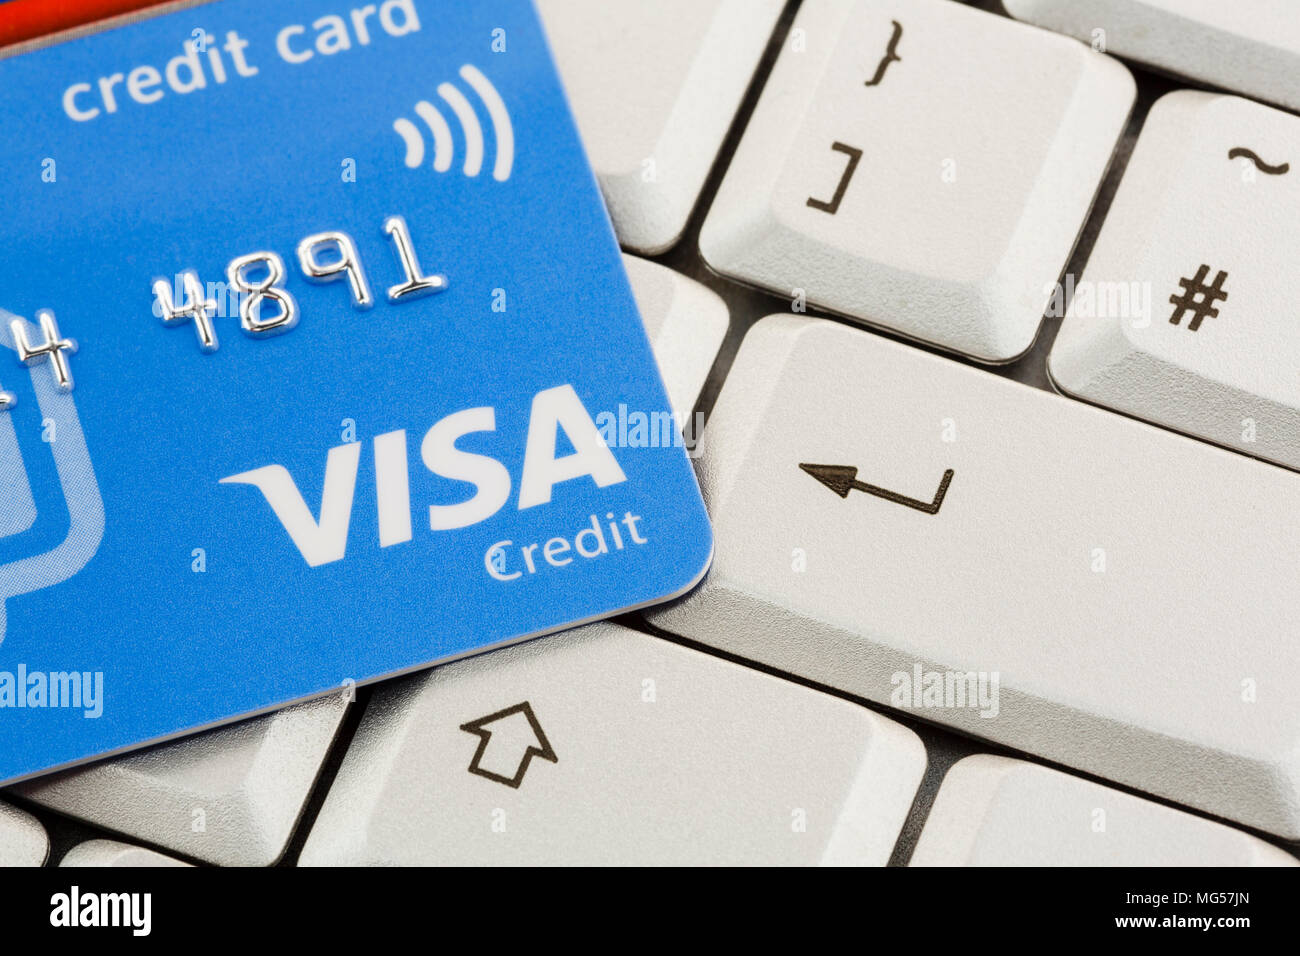 Visa card credit card on a keyboard with enter key. To illustrate online internet payment shopping concept using a credit card. England UK Britain Stock Photo